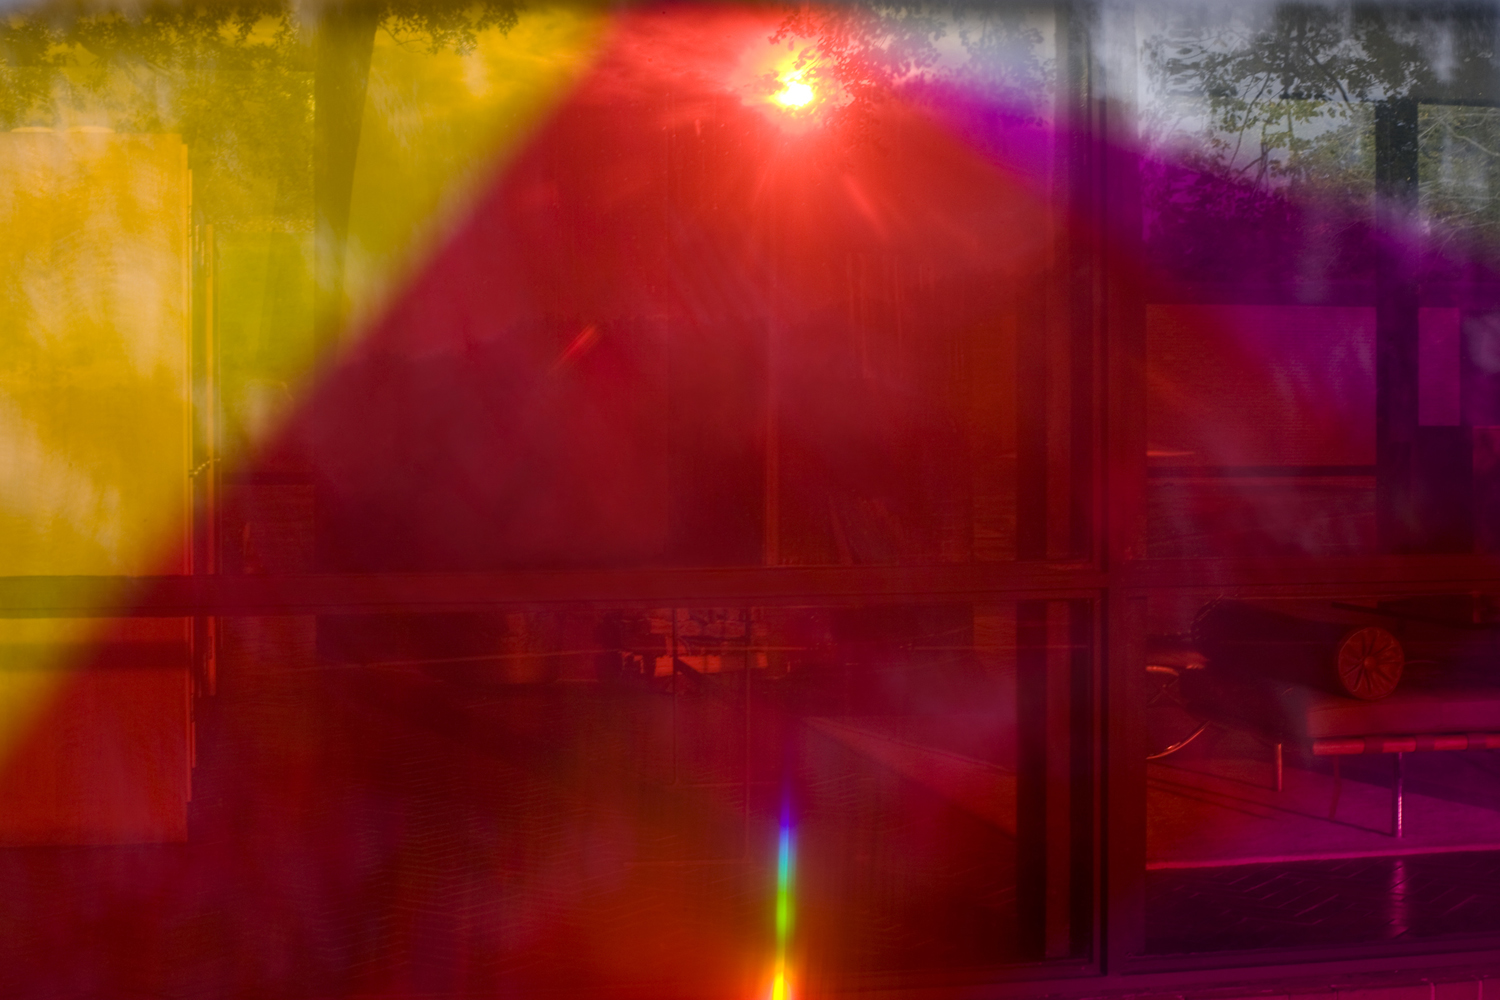 james_welling_glass_house_9818_2009_image__james_welling_courtesy_of_the_artist_.jpg